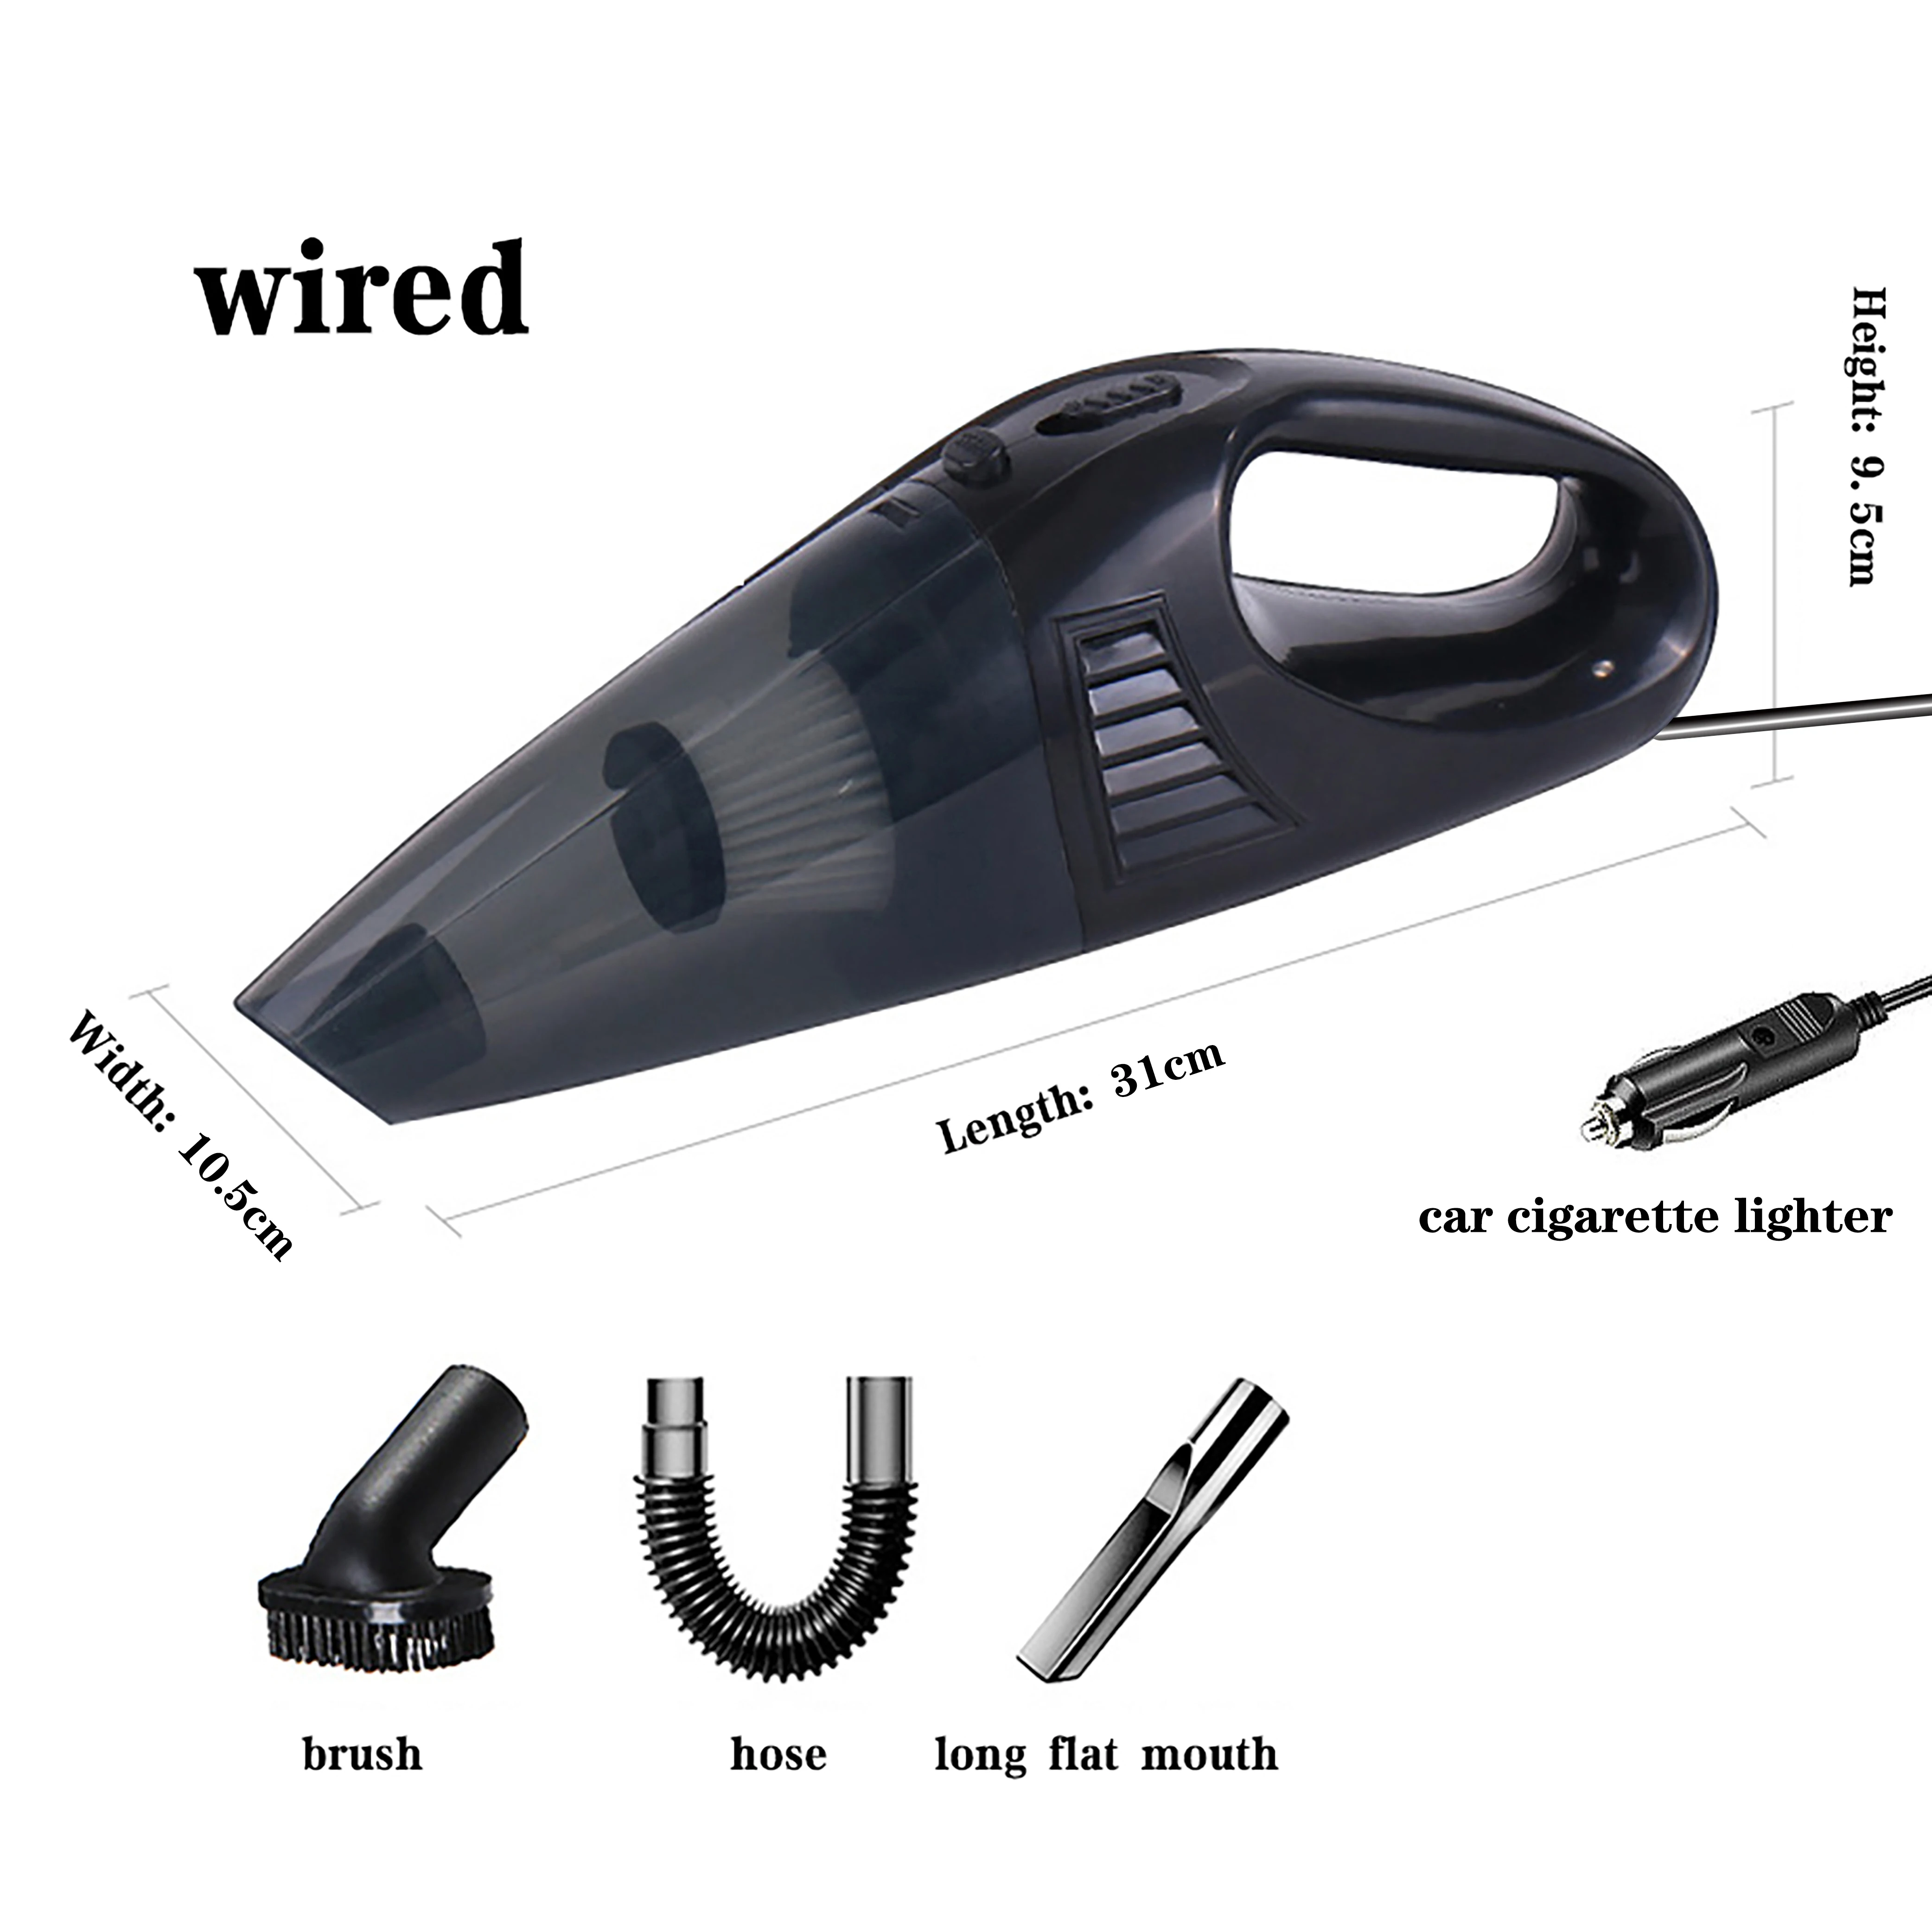 Good price for Cordless Powerful Suction Sweeper handheld Car Vacuum Cleaner